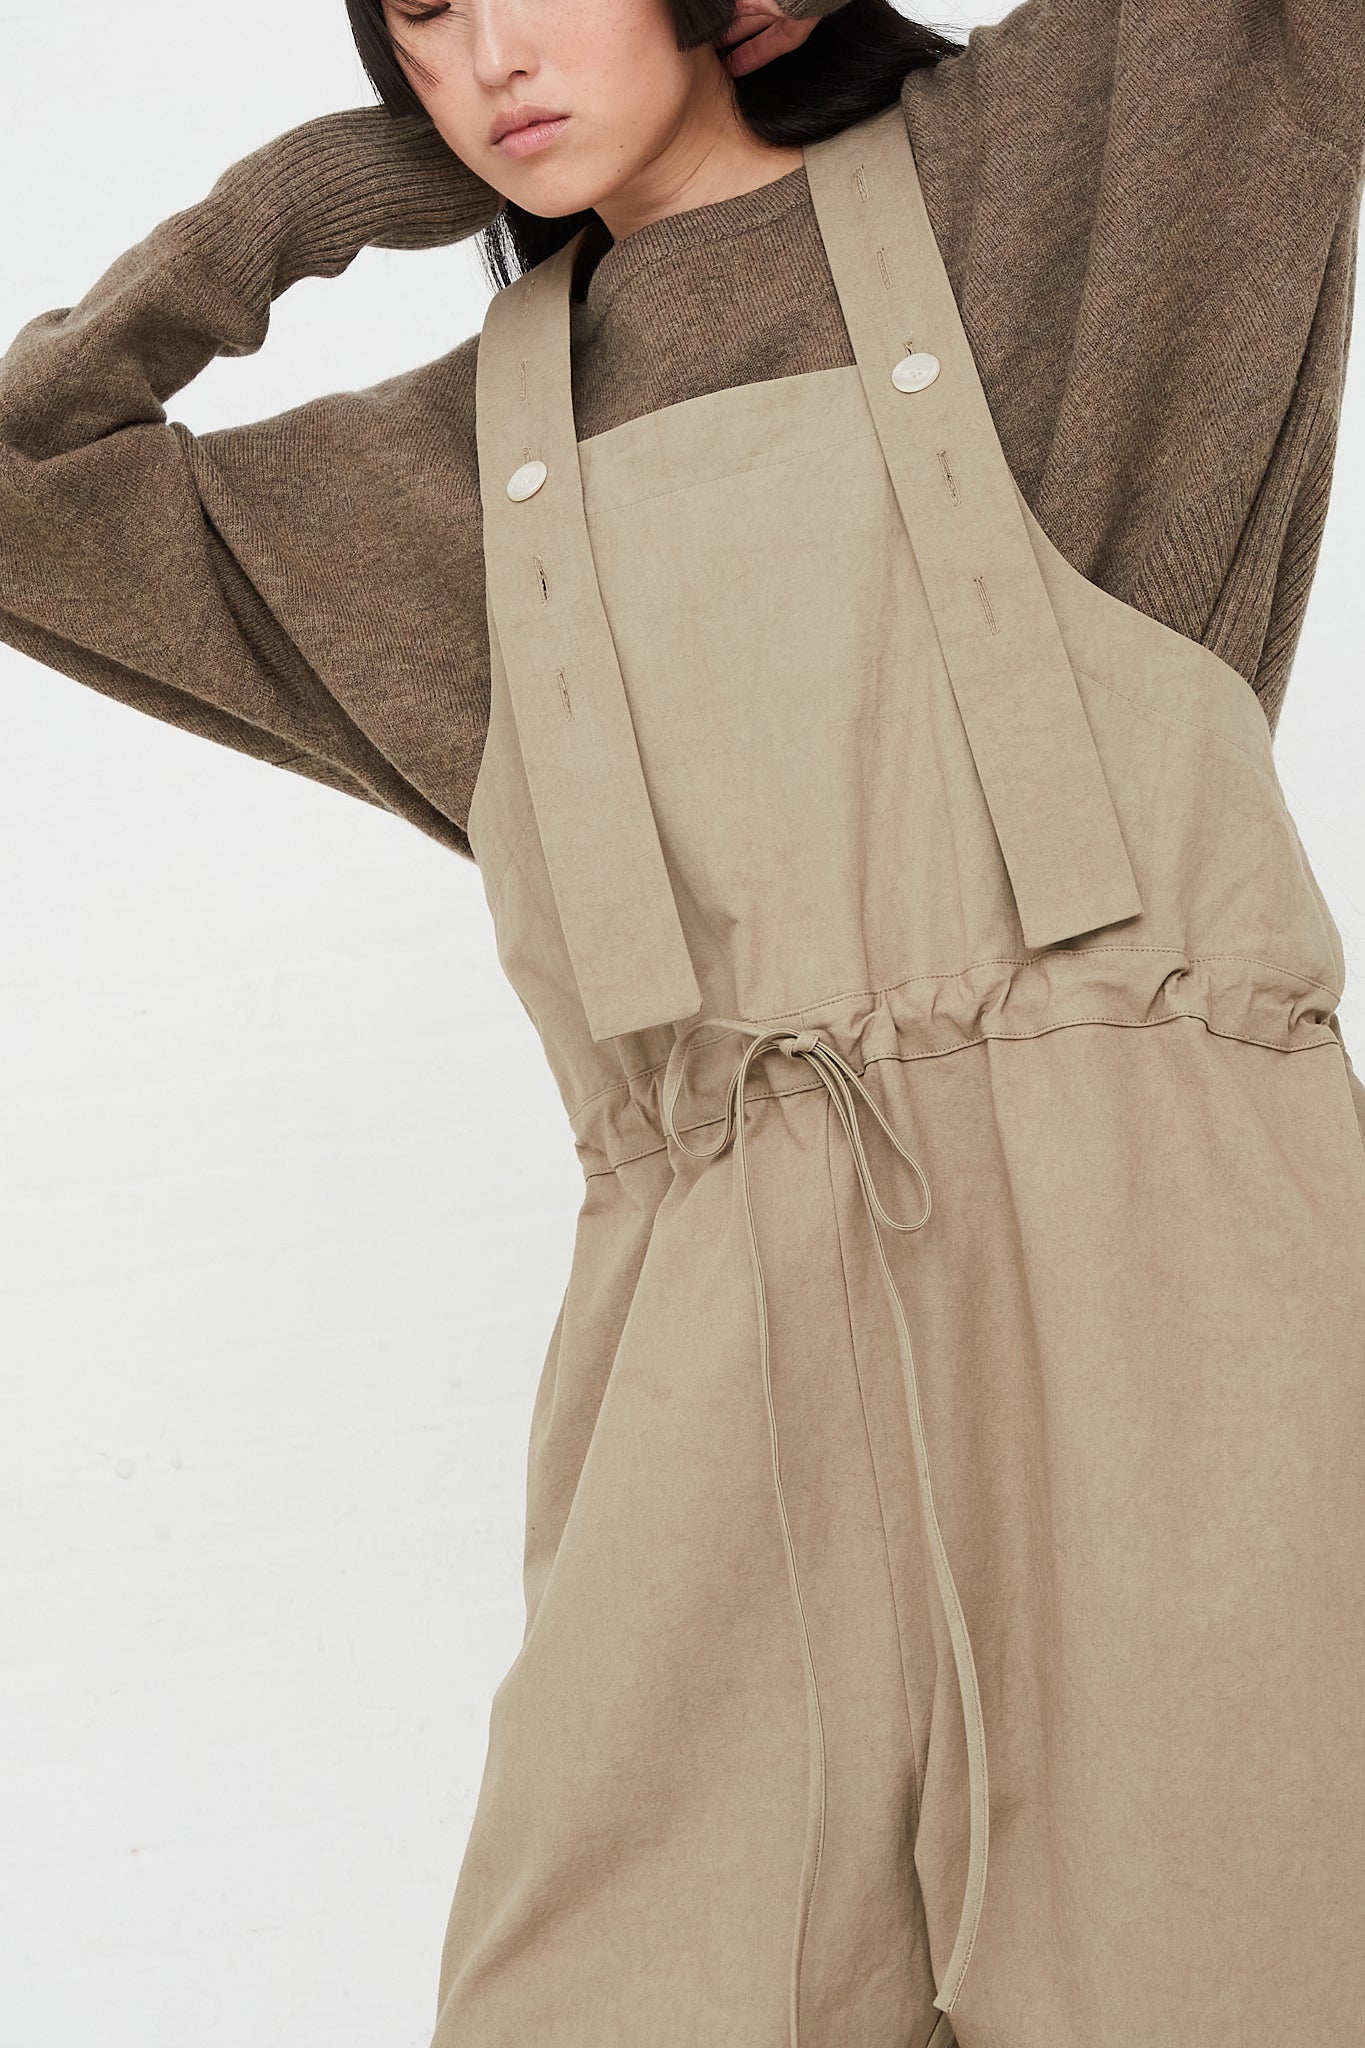 Lightweight Overalls in Drab by Lauren Manoogian for Oroboro Front Upclose